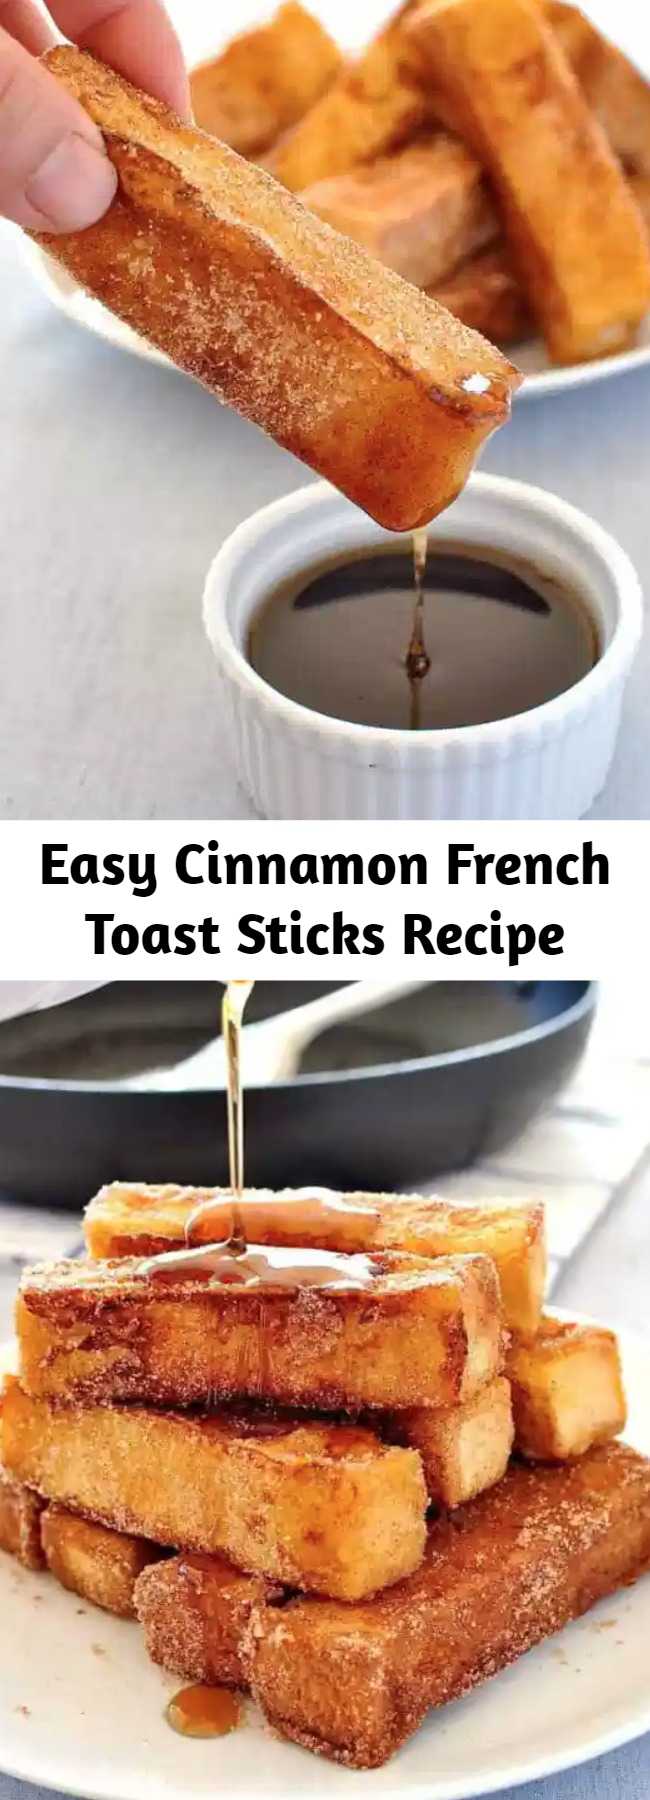 Easy Cinnamon French Toast Sticks Recipe - Eat it with your fingers (tick), tastes like cinnamon doughnuts but a whole lot healthier (double tick)!